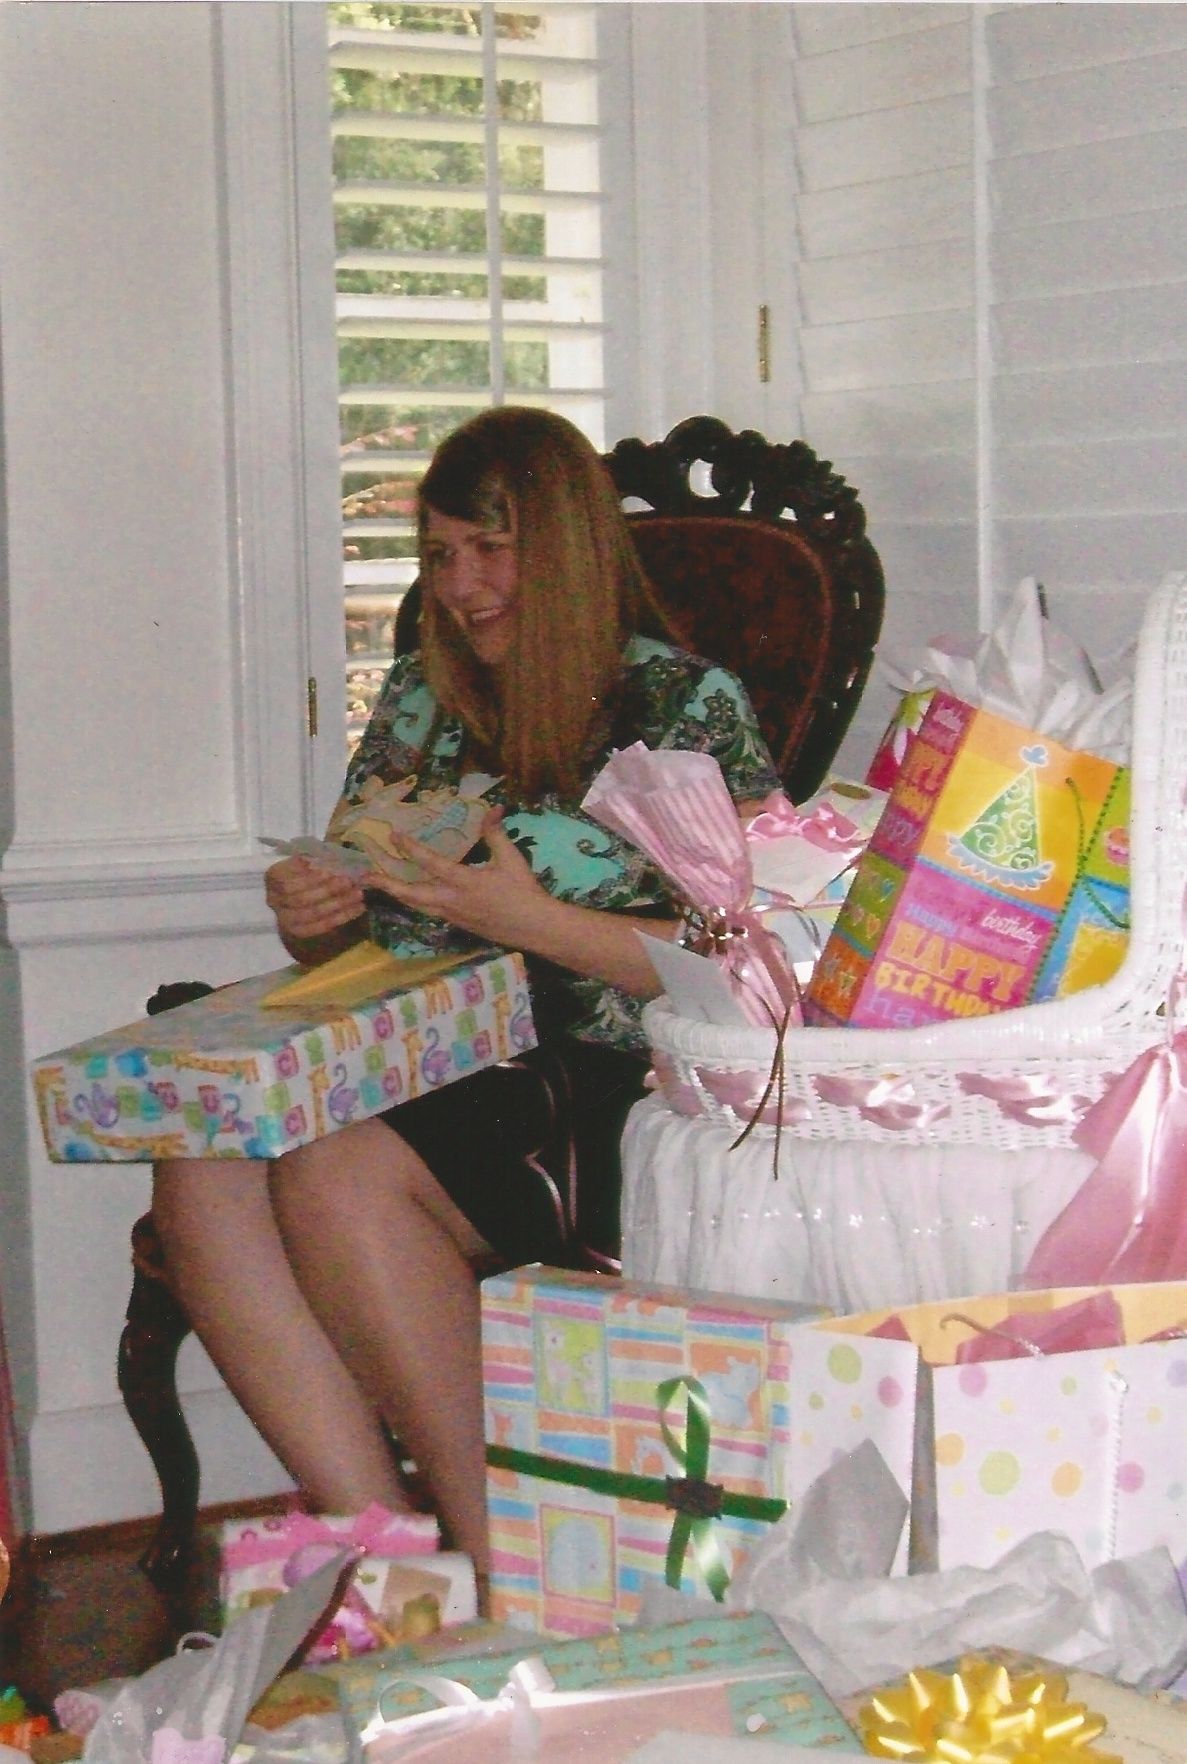 Brooke with presents